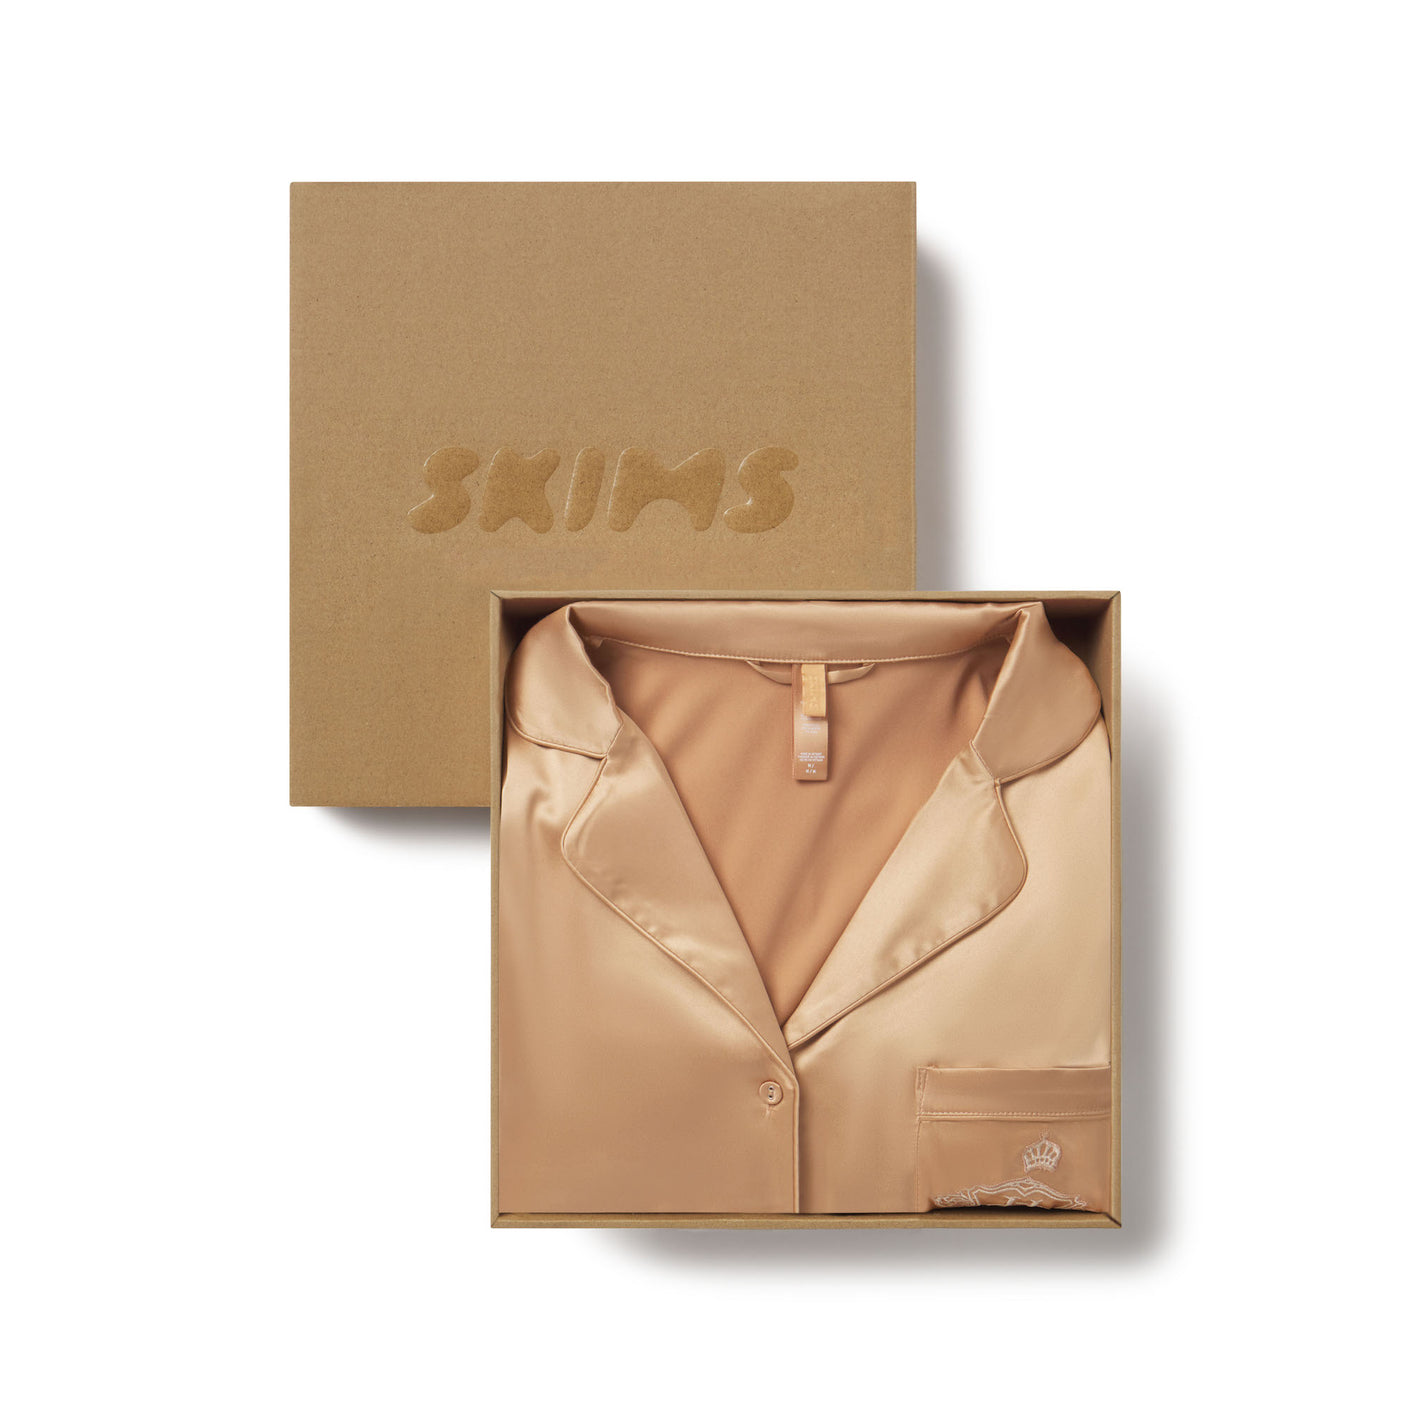 SKIMS  Time to shine! Don't miss seasonal shades of Gold and